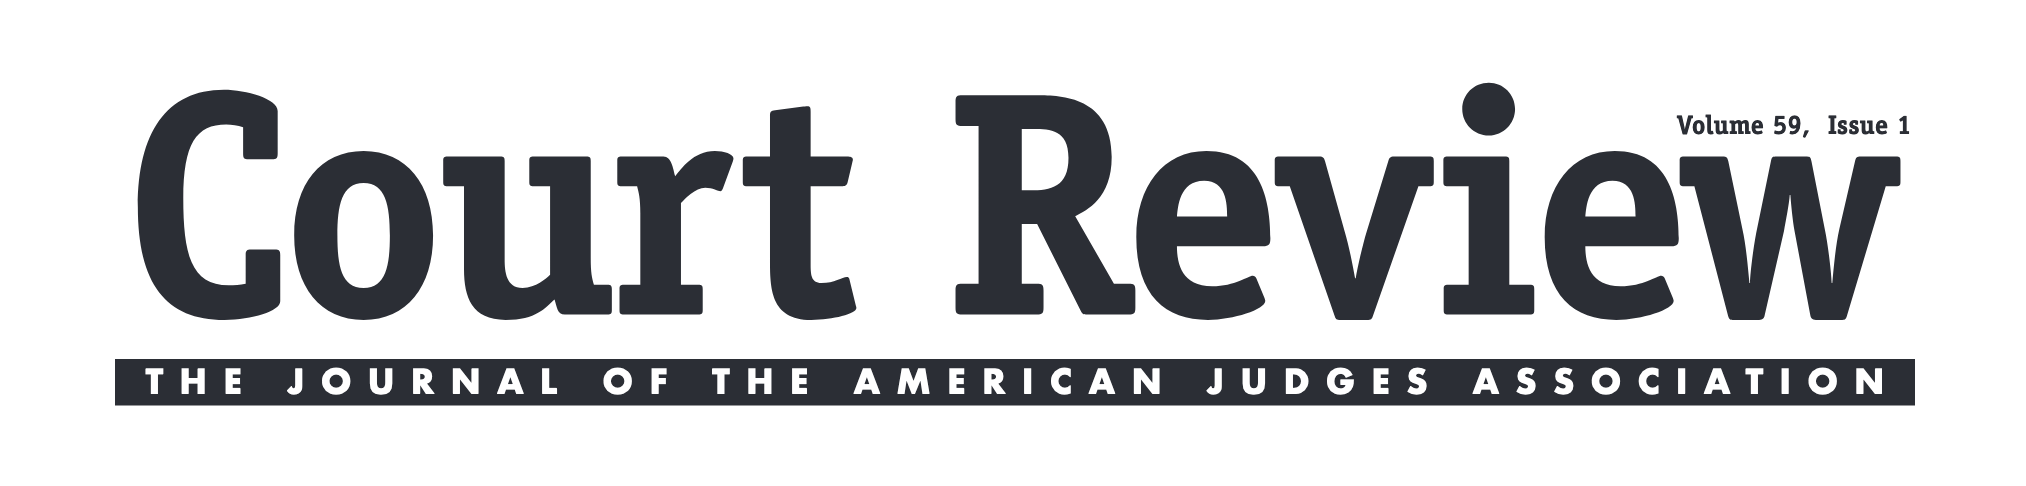 The Court Review - The Journal of the American Judges Association